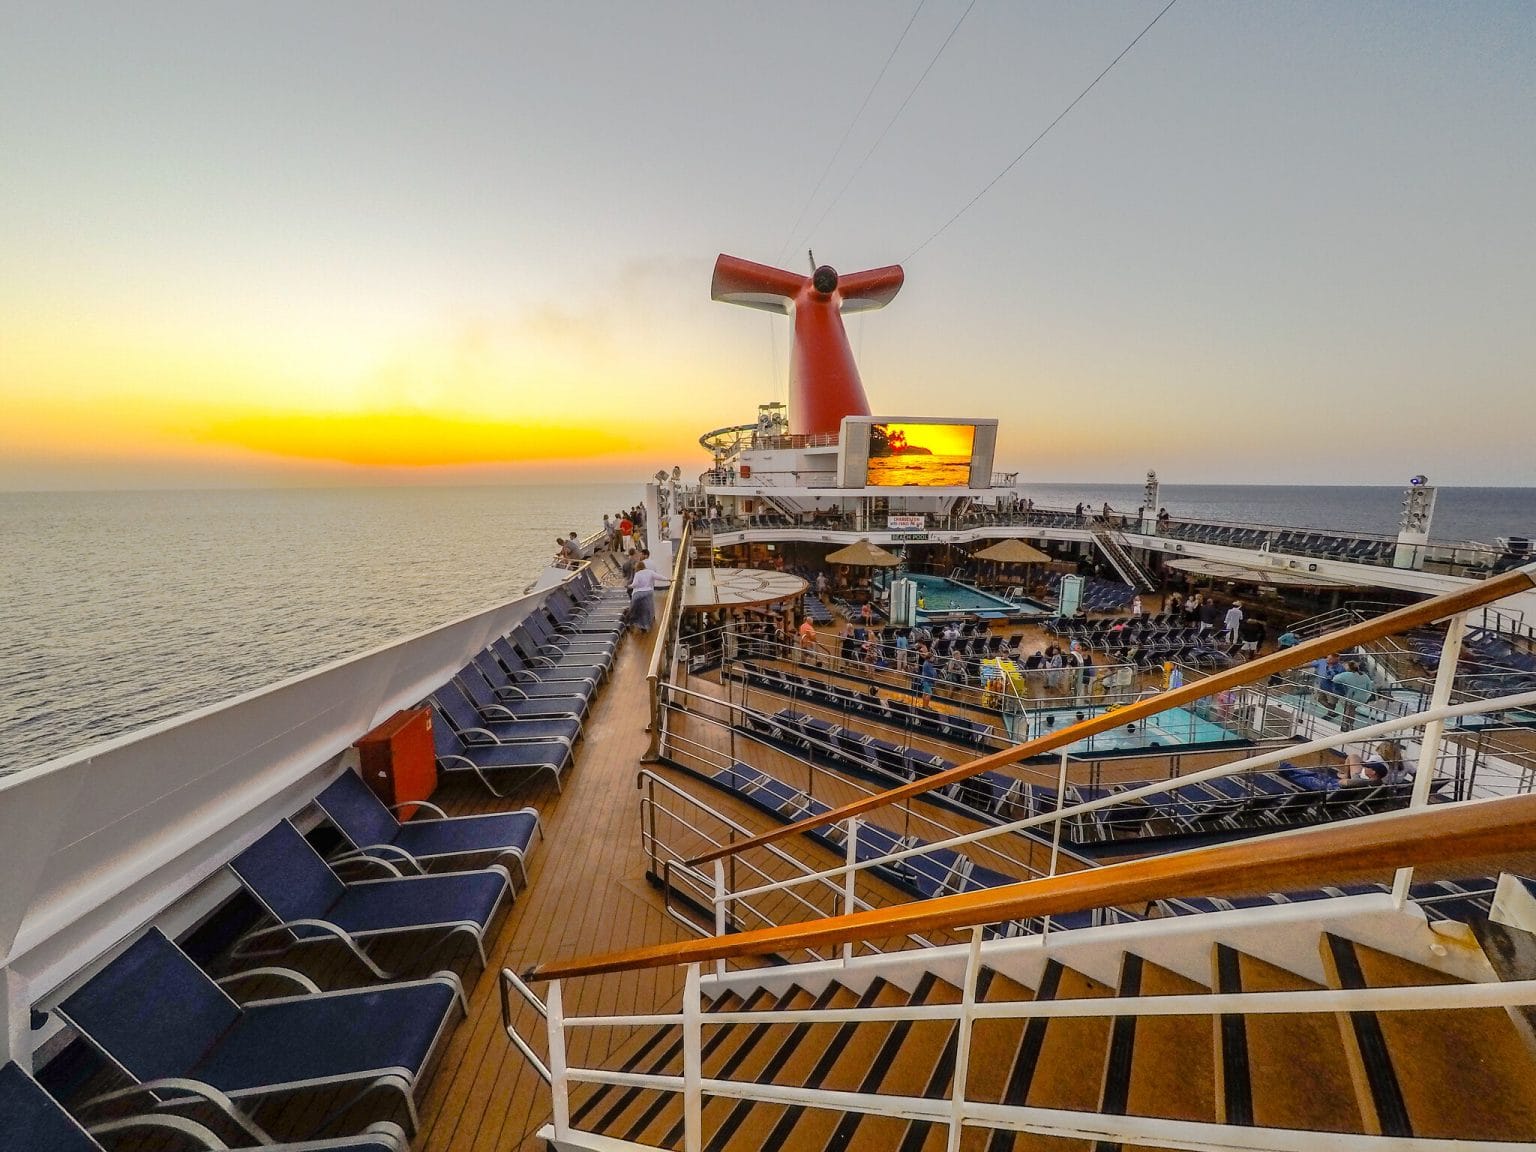 3 day cruise to jamaica from florida